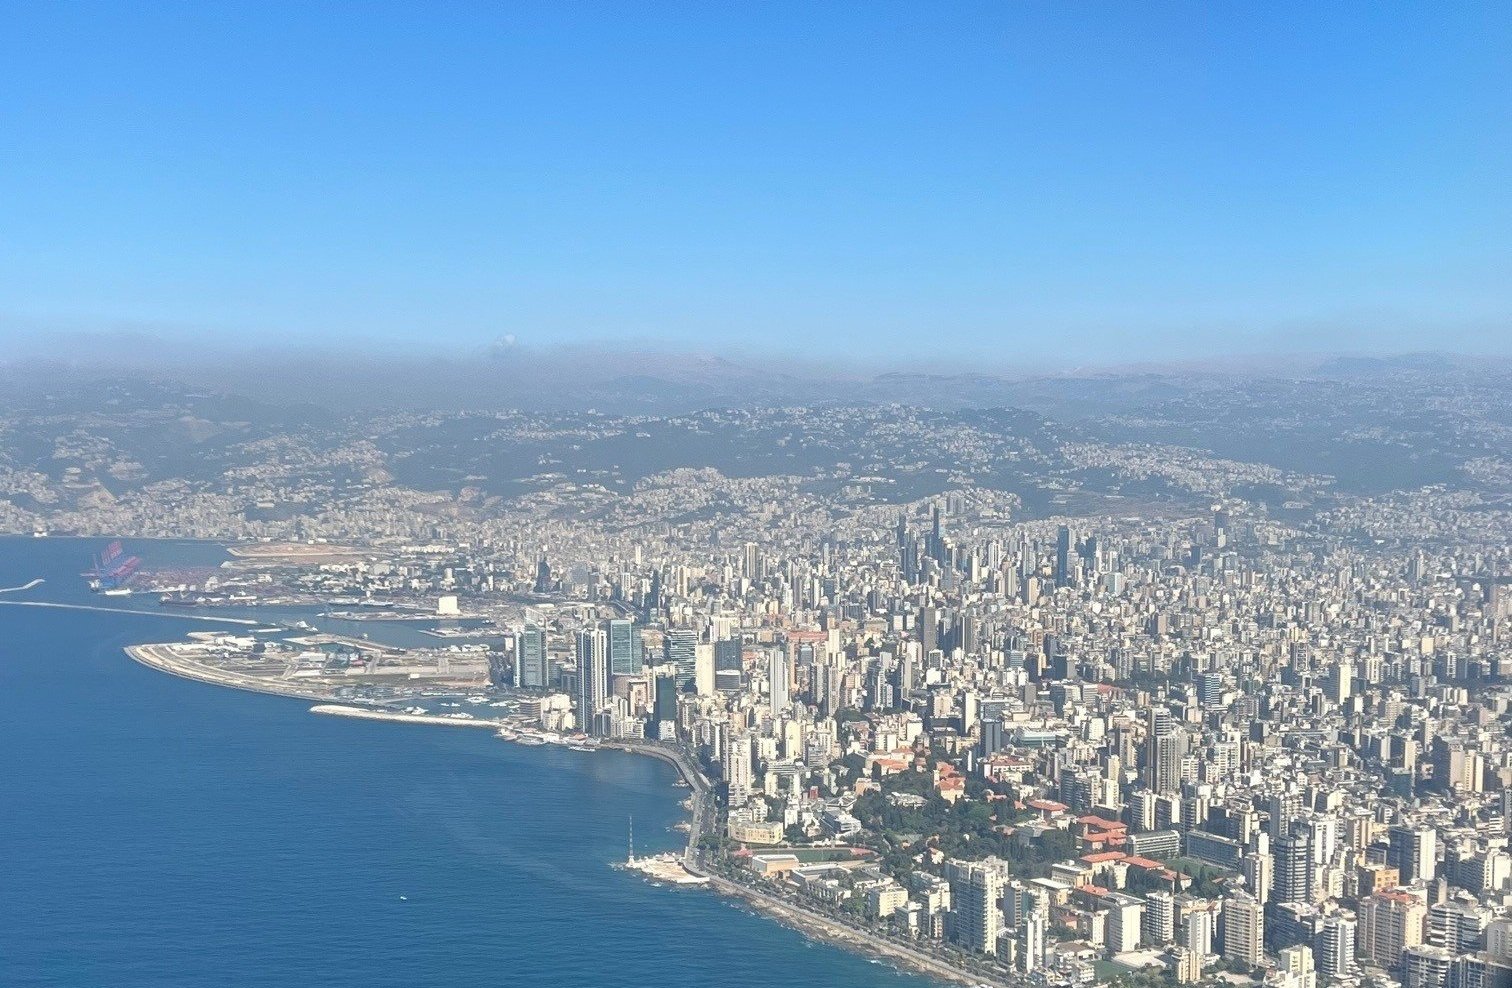  On arrival in Beirut 